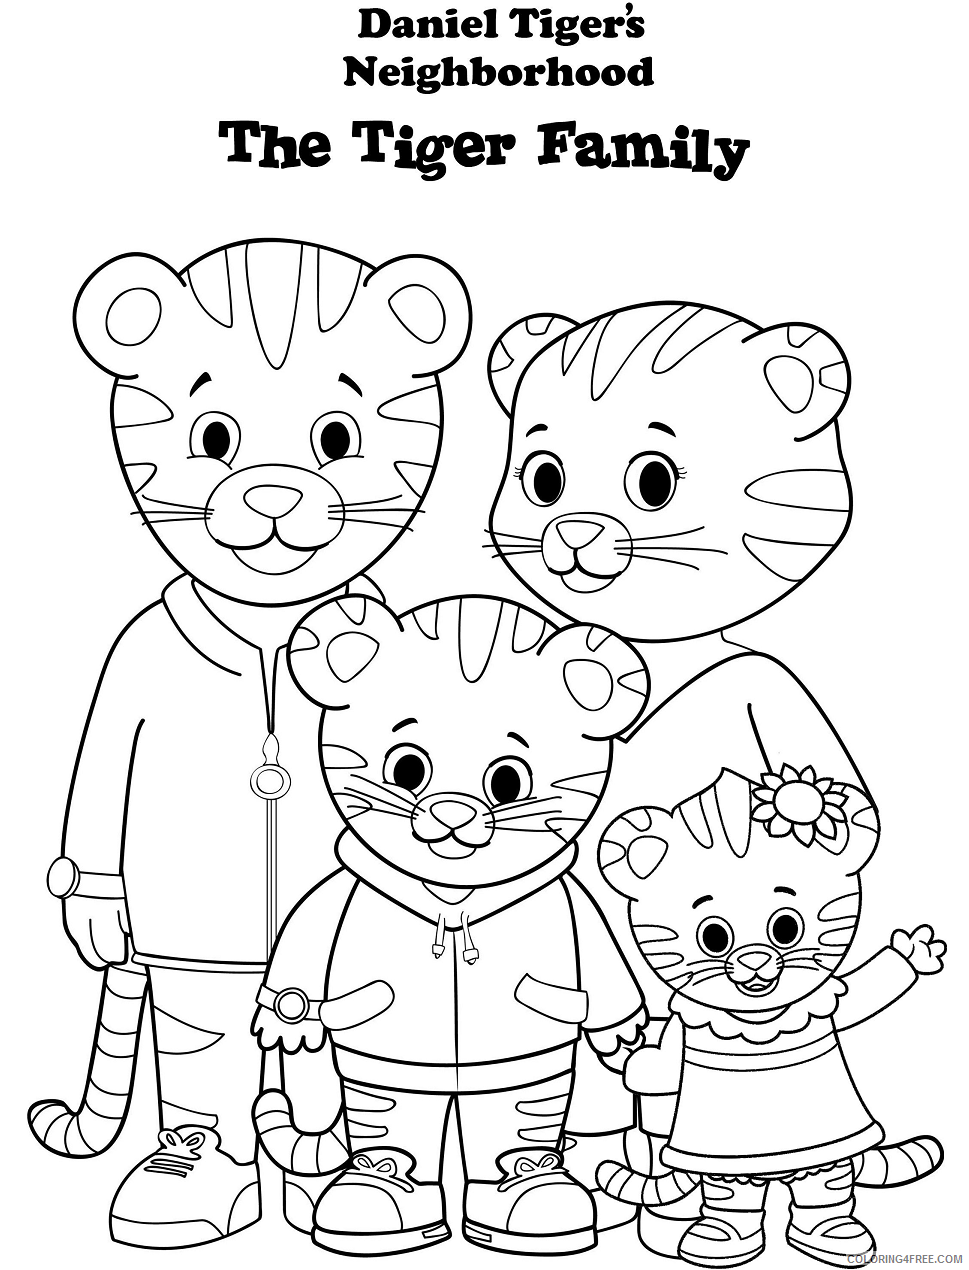 Daniel Tiger Coloring Pages TV Film daniel_tiger_family a4 Printable 2020 02331 Coloring4free